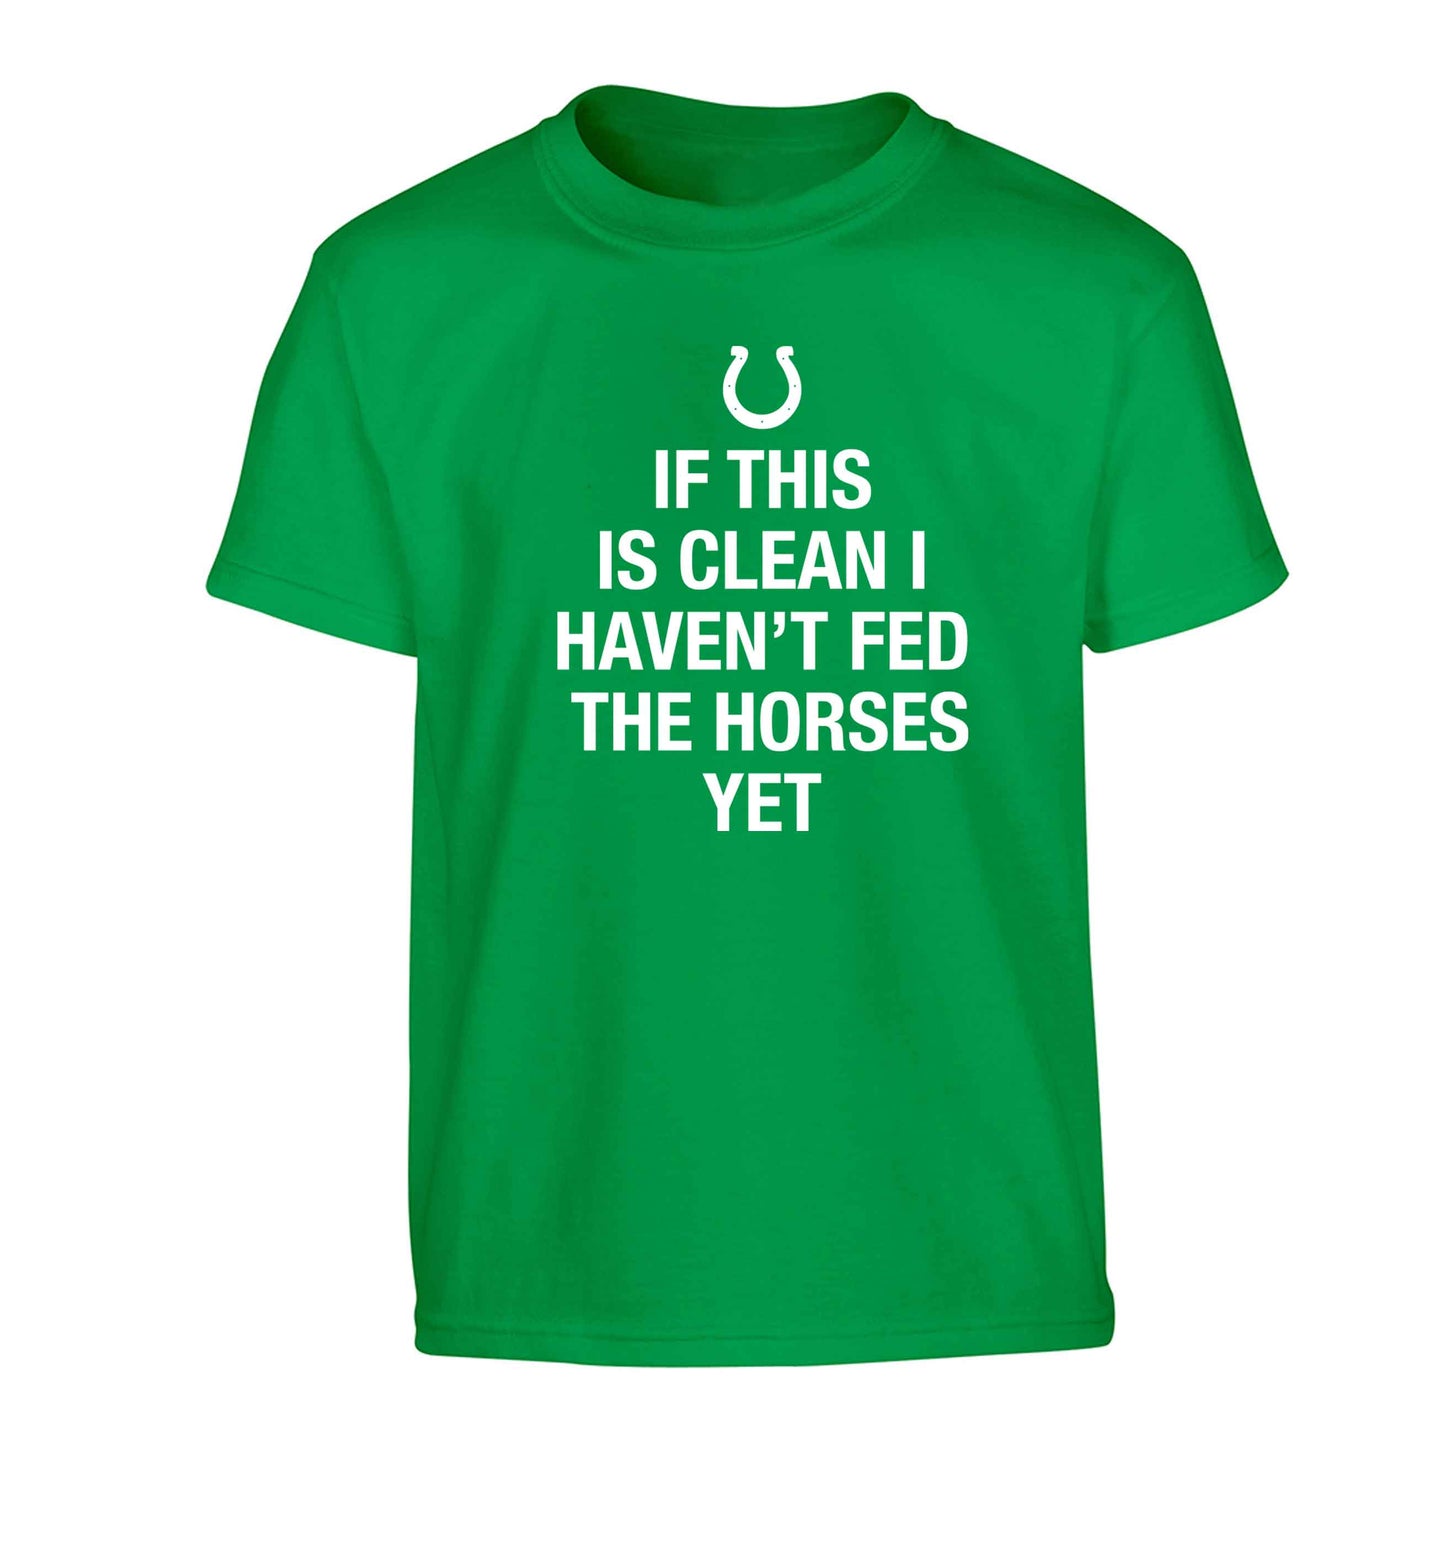 If this isn't clean I haven't fed the horses yet Children's green Tshirt 12-13 Years